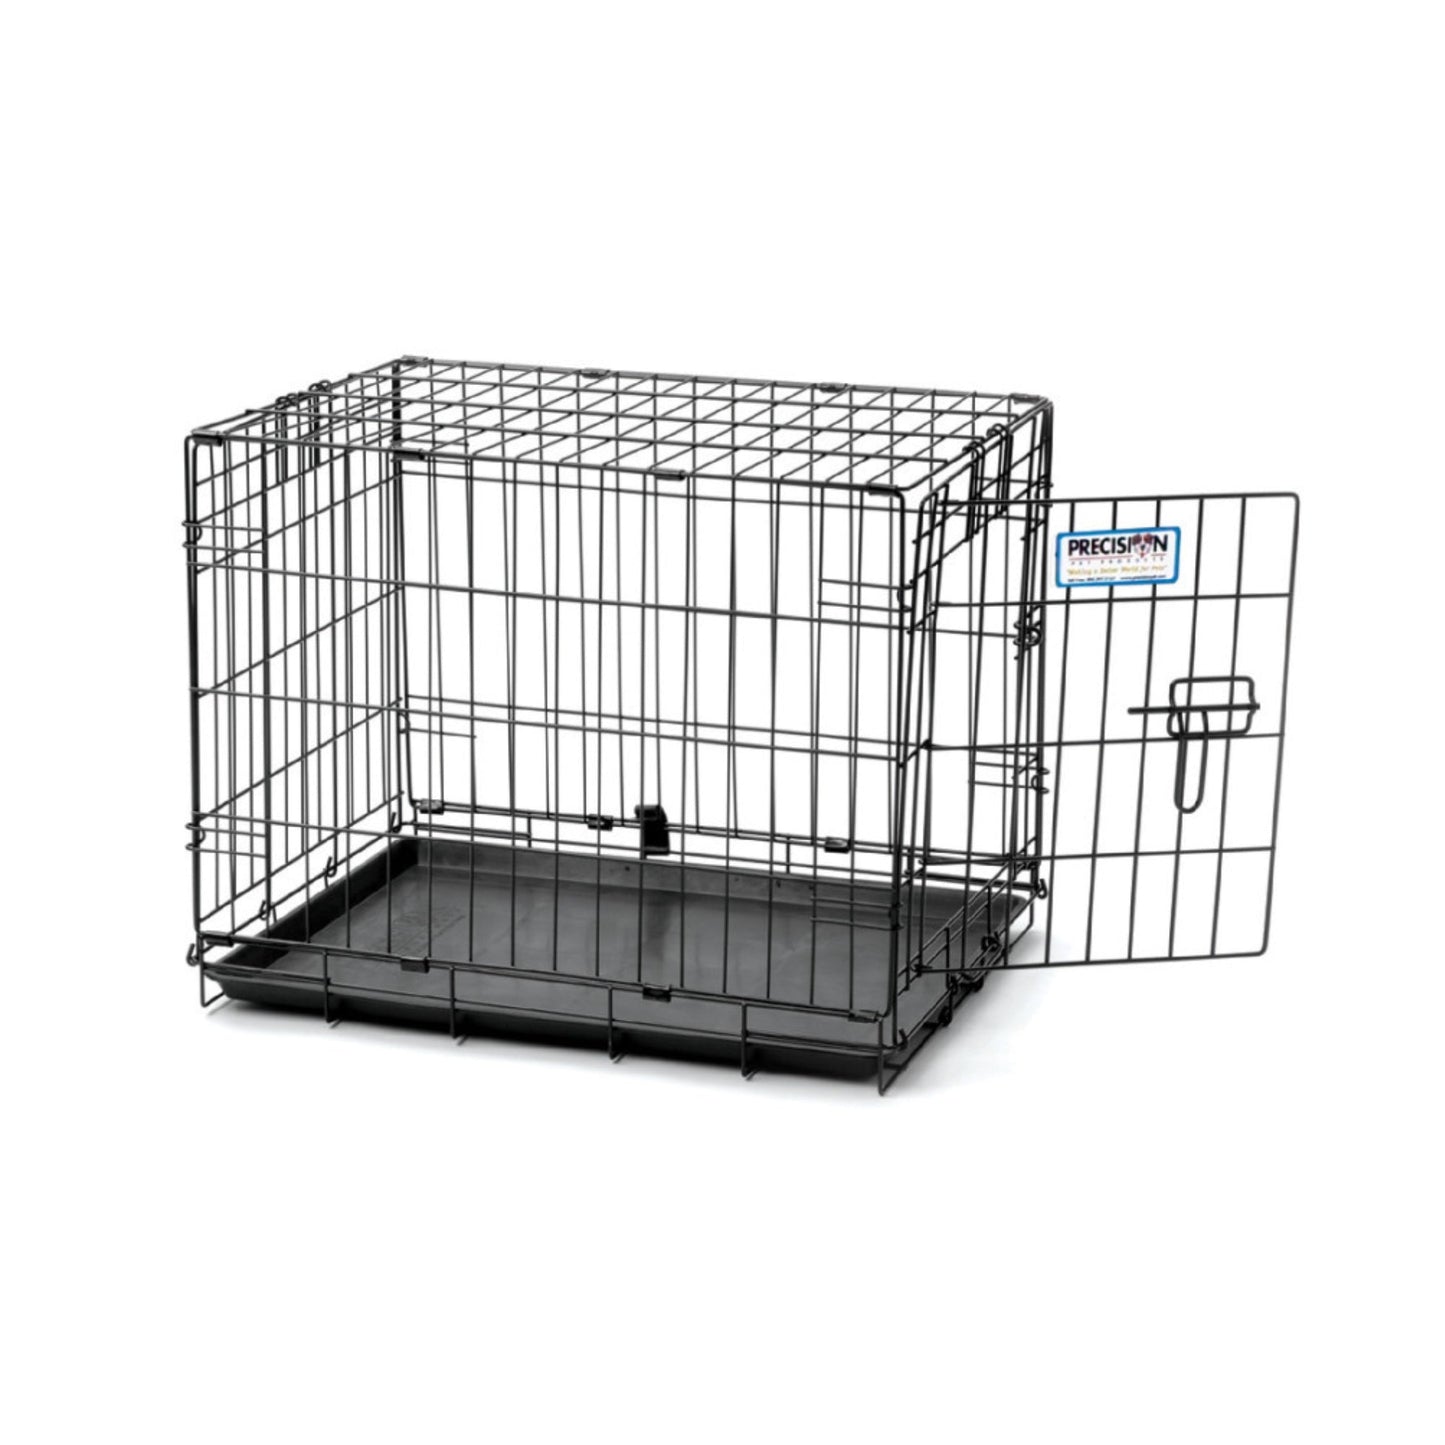 Precision Pet Products ProValu 1 Door Wire Dog Crate Black 1ea/30 in